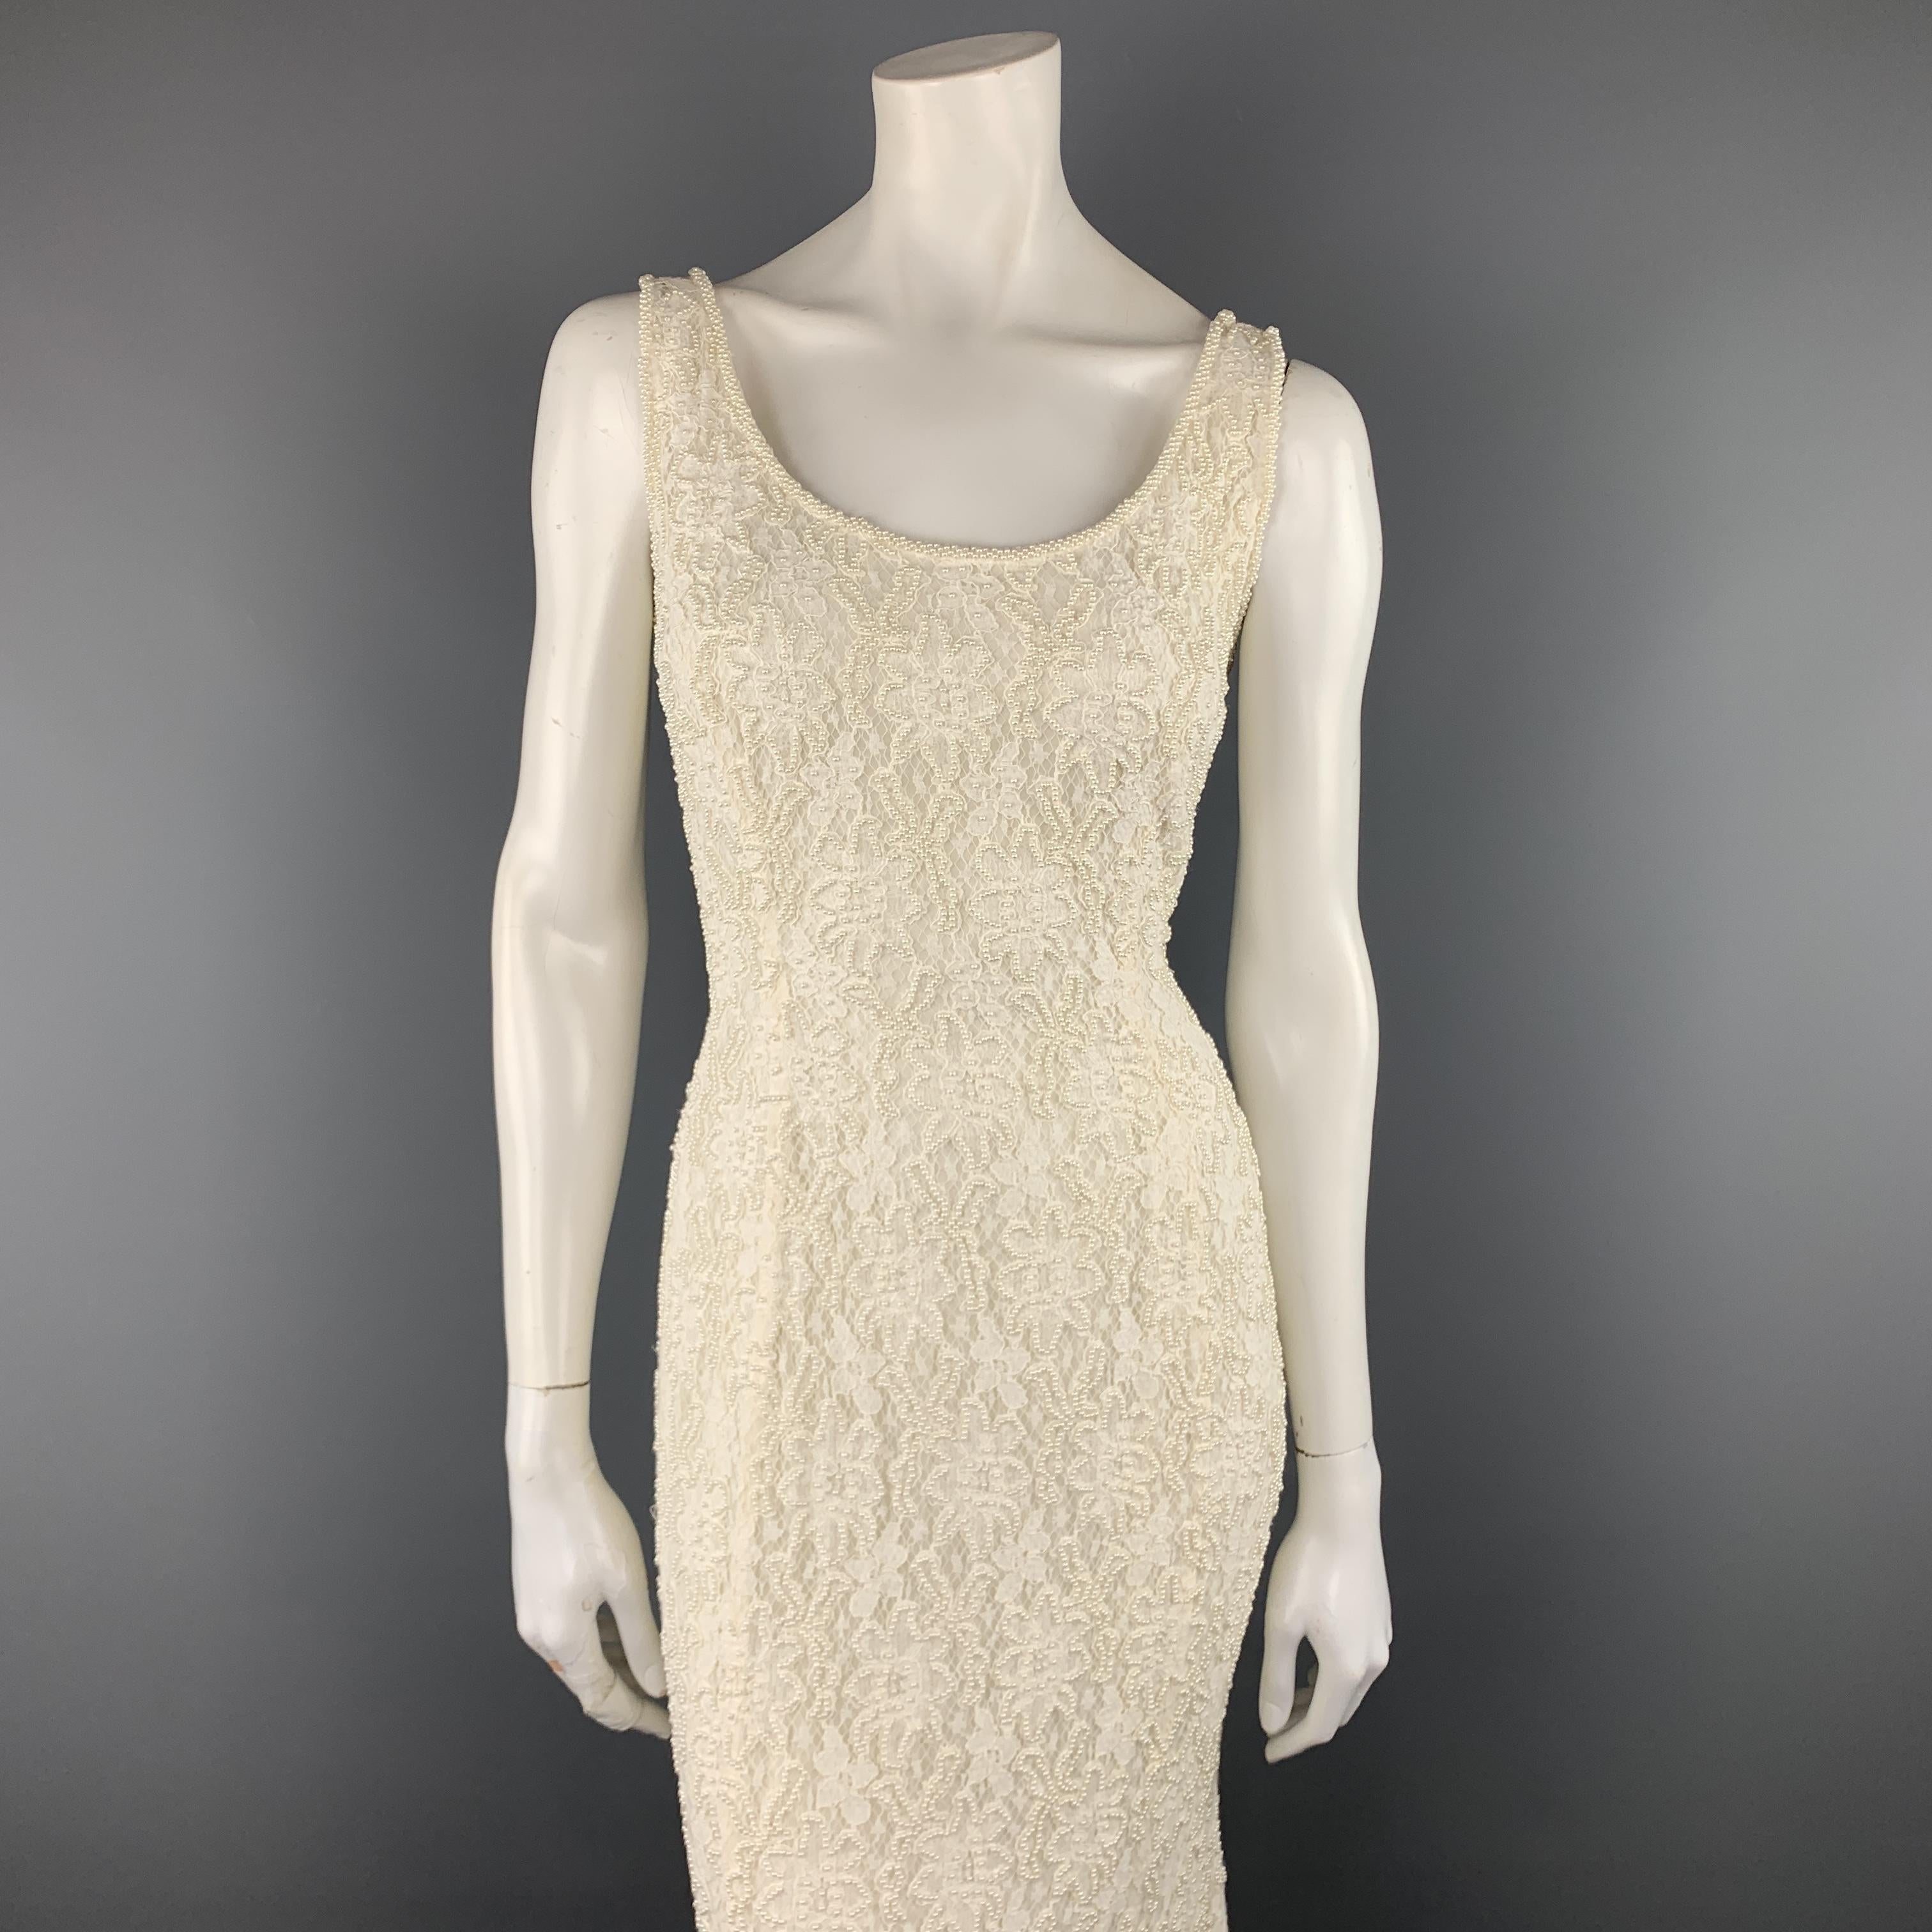 CARMEN MARC VALVO gown comes in cream viscose with a beaded lace overlay featuring a scoop neck and flared hem. 

Excellent Pre-Owned Condition.
Marked: 4

Measurements:

Shoulder: 14 in.
Bust: 36 in.
Waist: 28 in.
Hip: 40 in.
Length: 57 in.